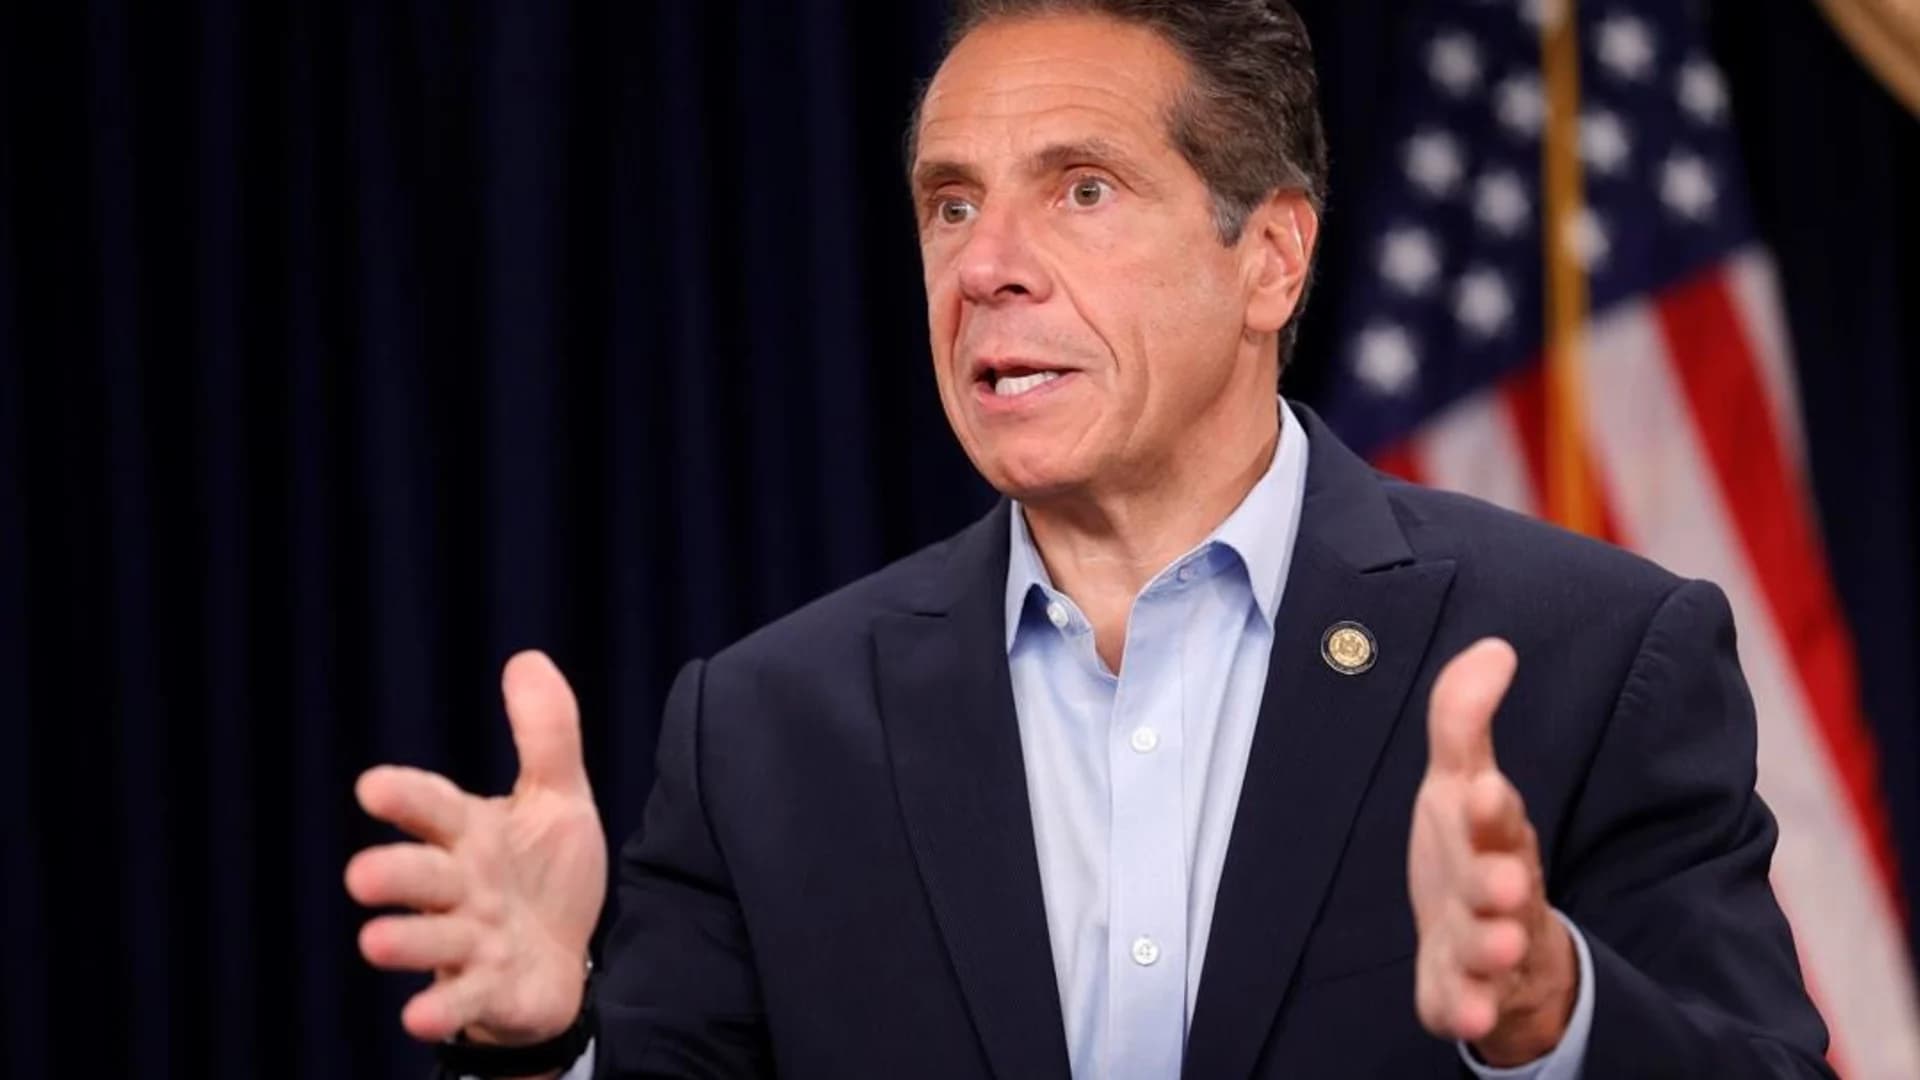 247wallst.com: Cuomo is 2nd highest paid governor in US